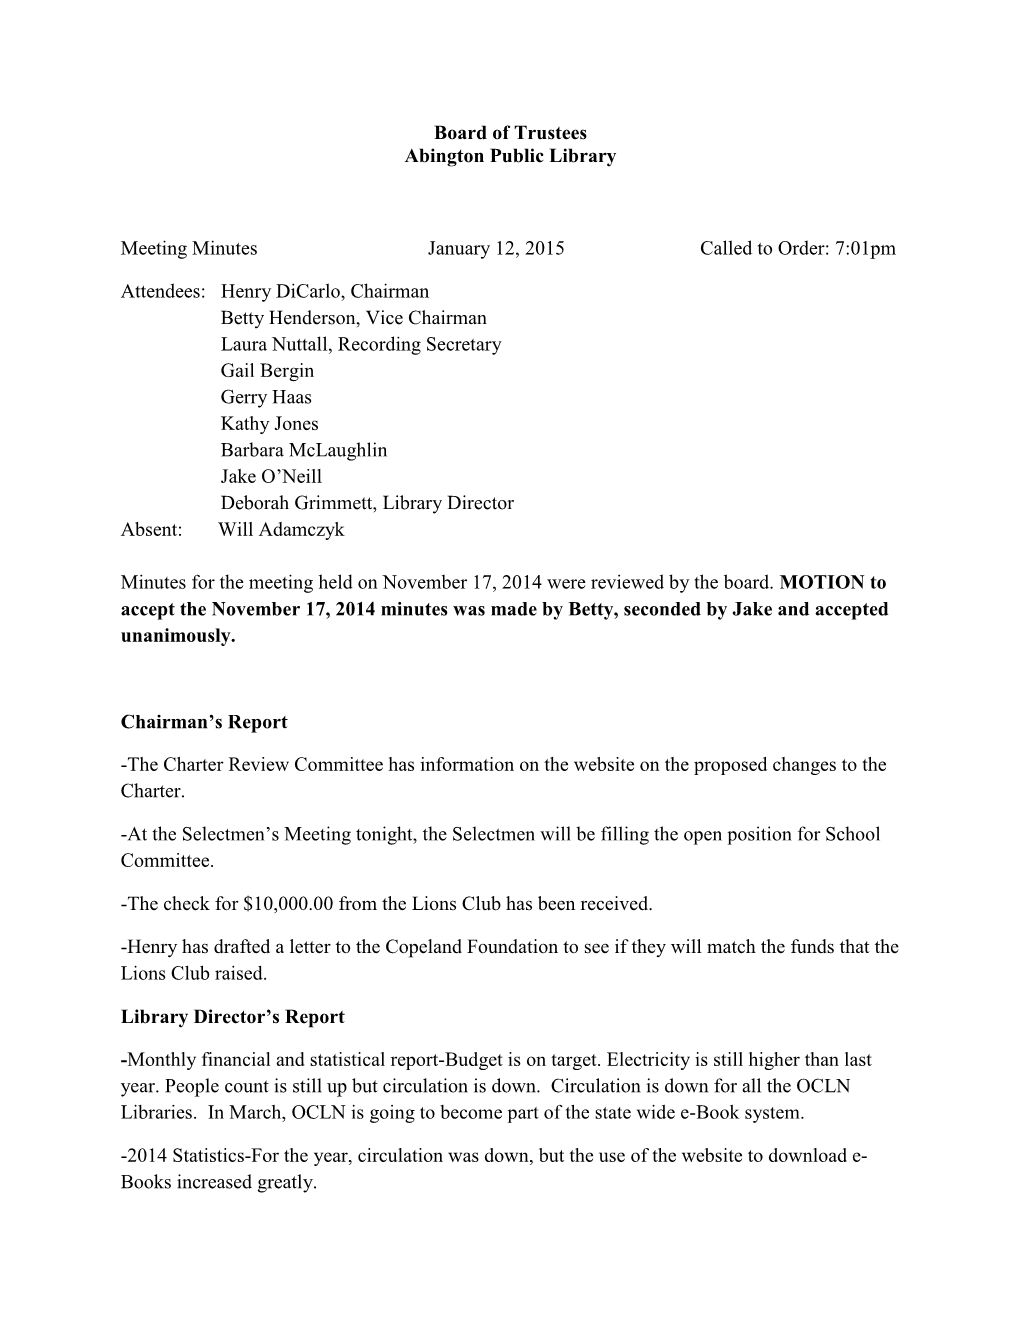 Board of Trustees Abington Public Library Meeting Minutes January 12